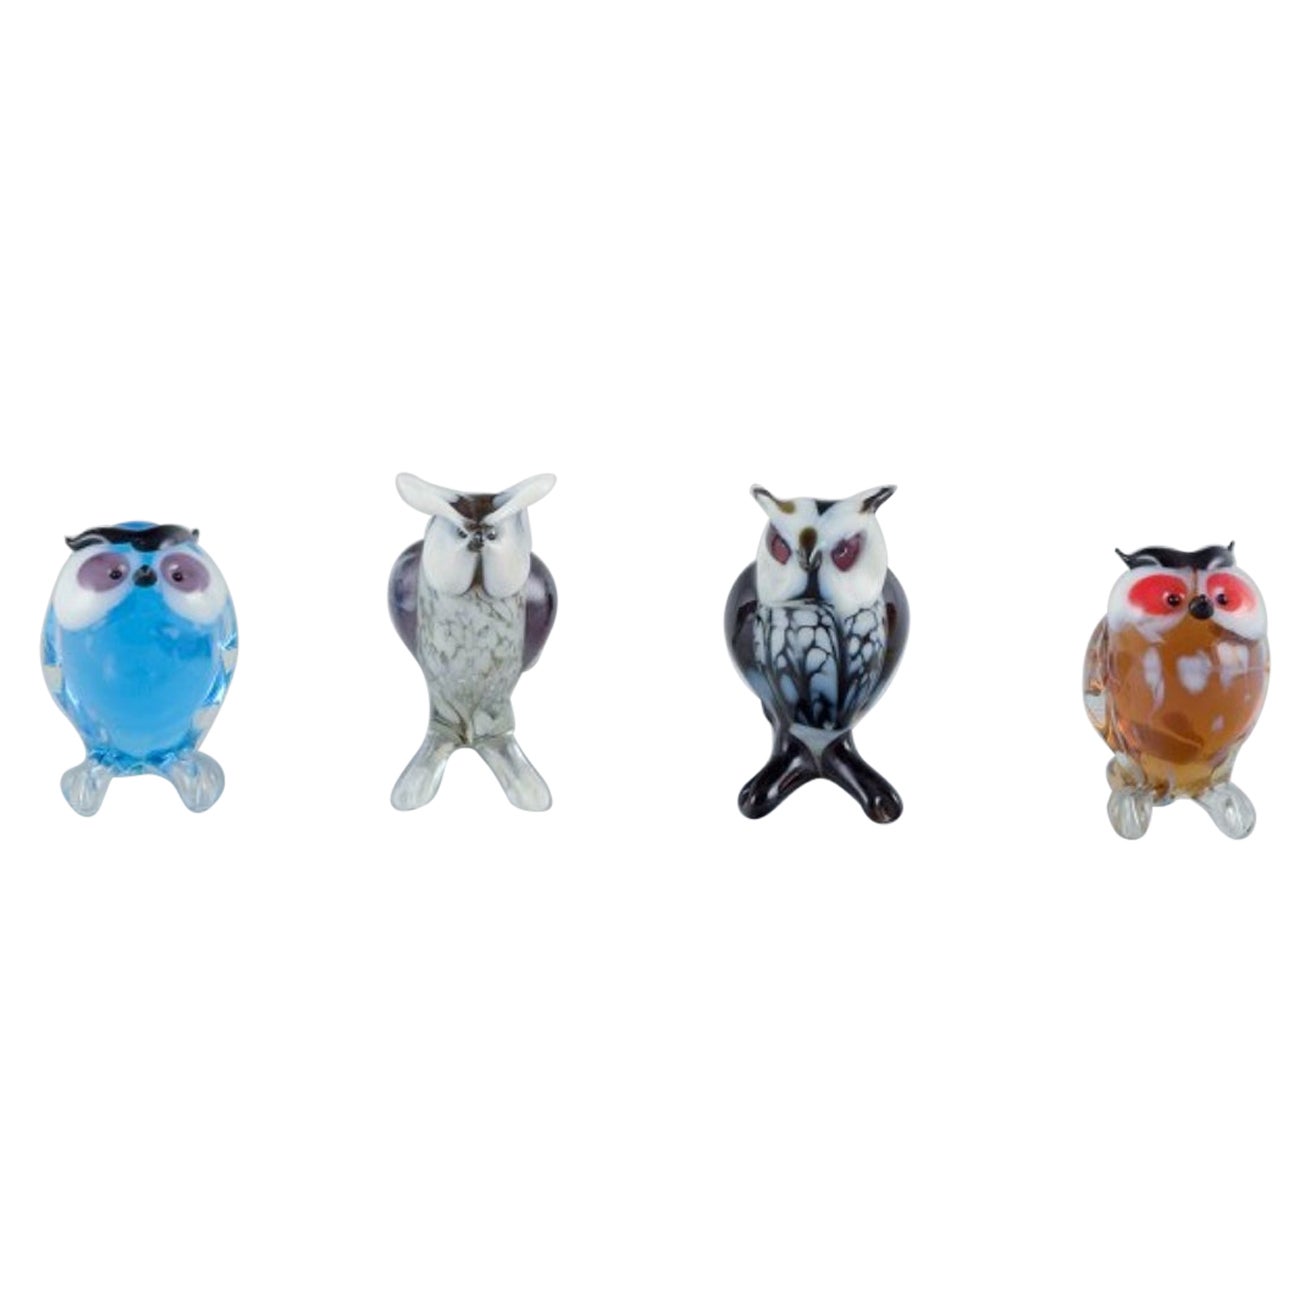 Murano, Italie. The Collective of four miniature glass figurines of owls.